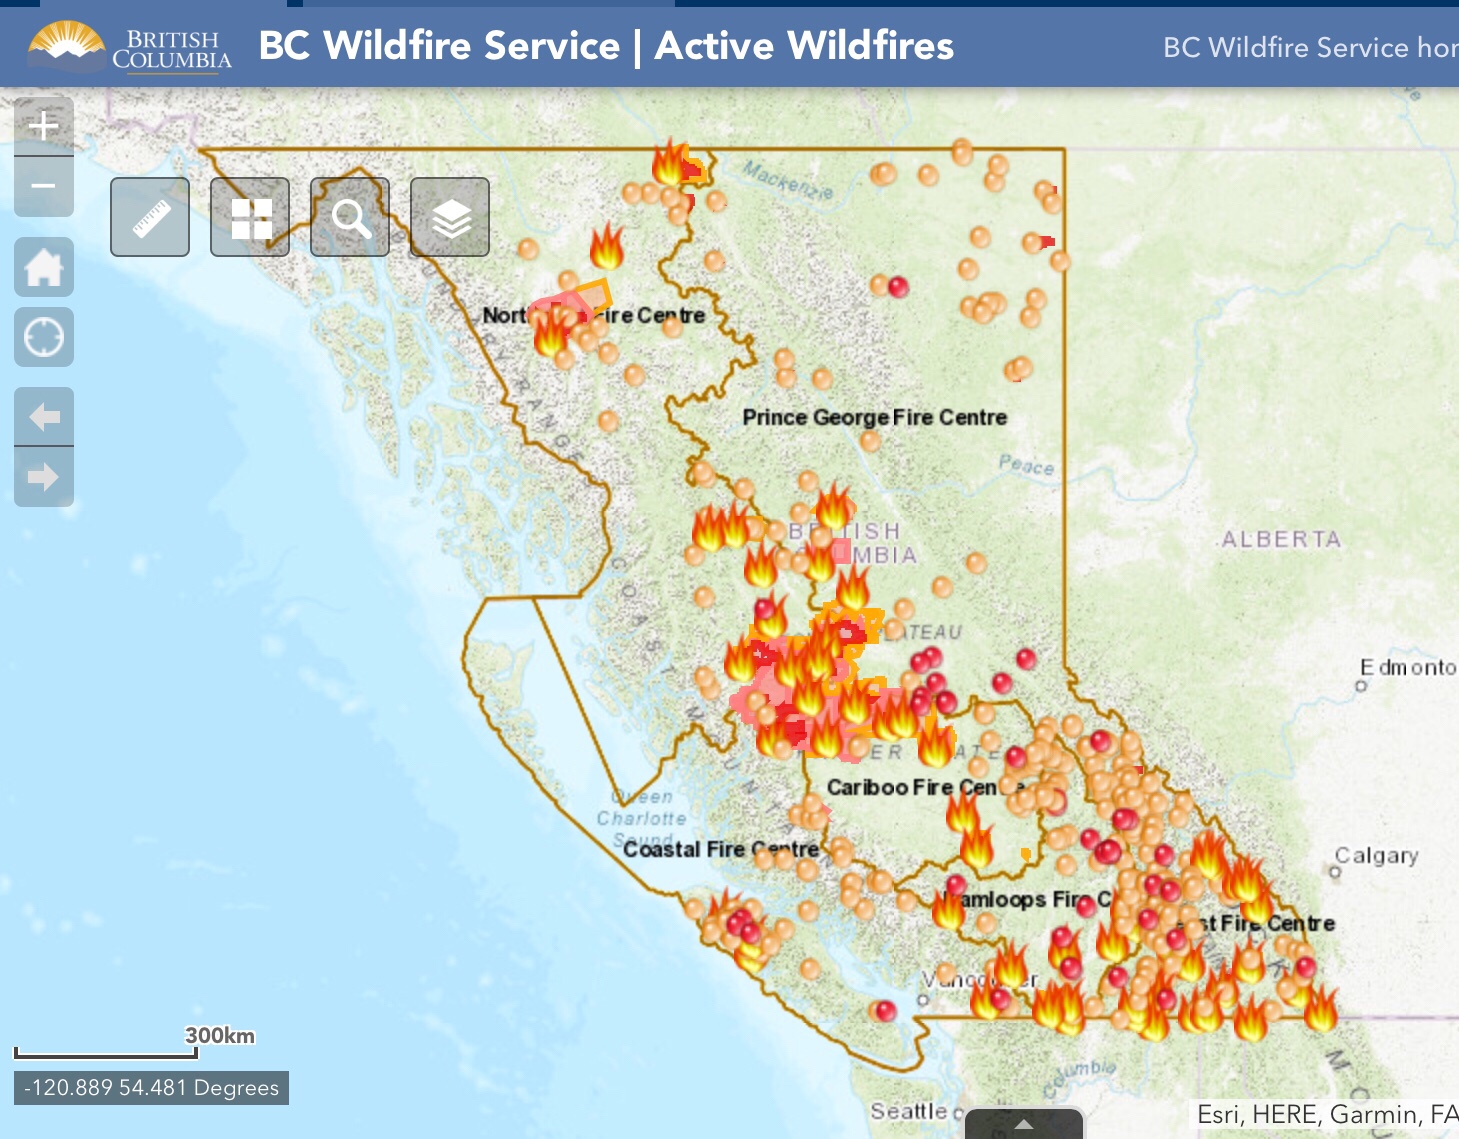 The live British Columbia wildfire map from August 20, 2018.